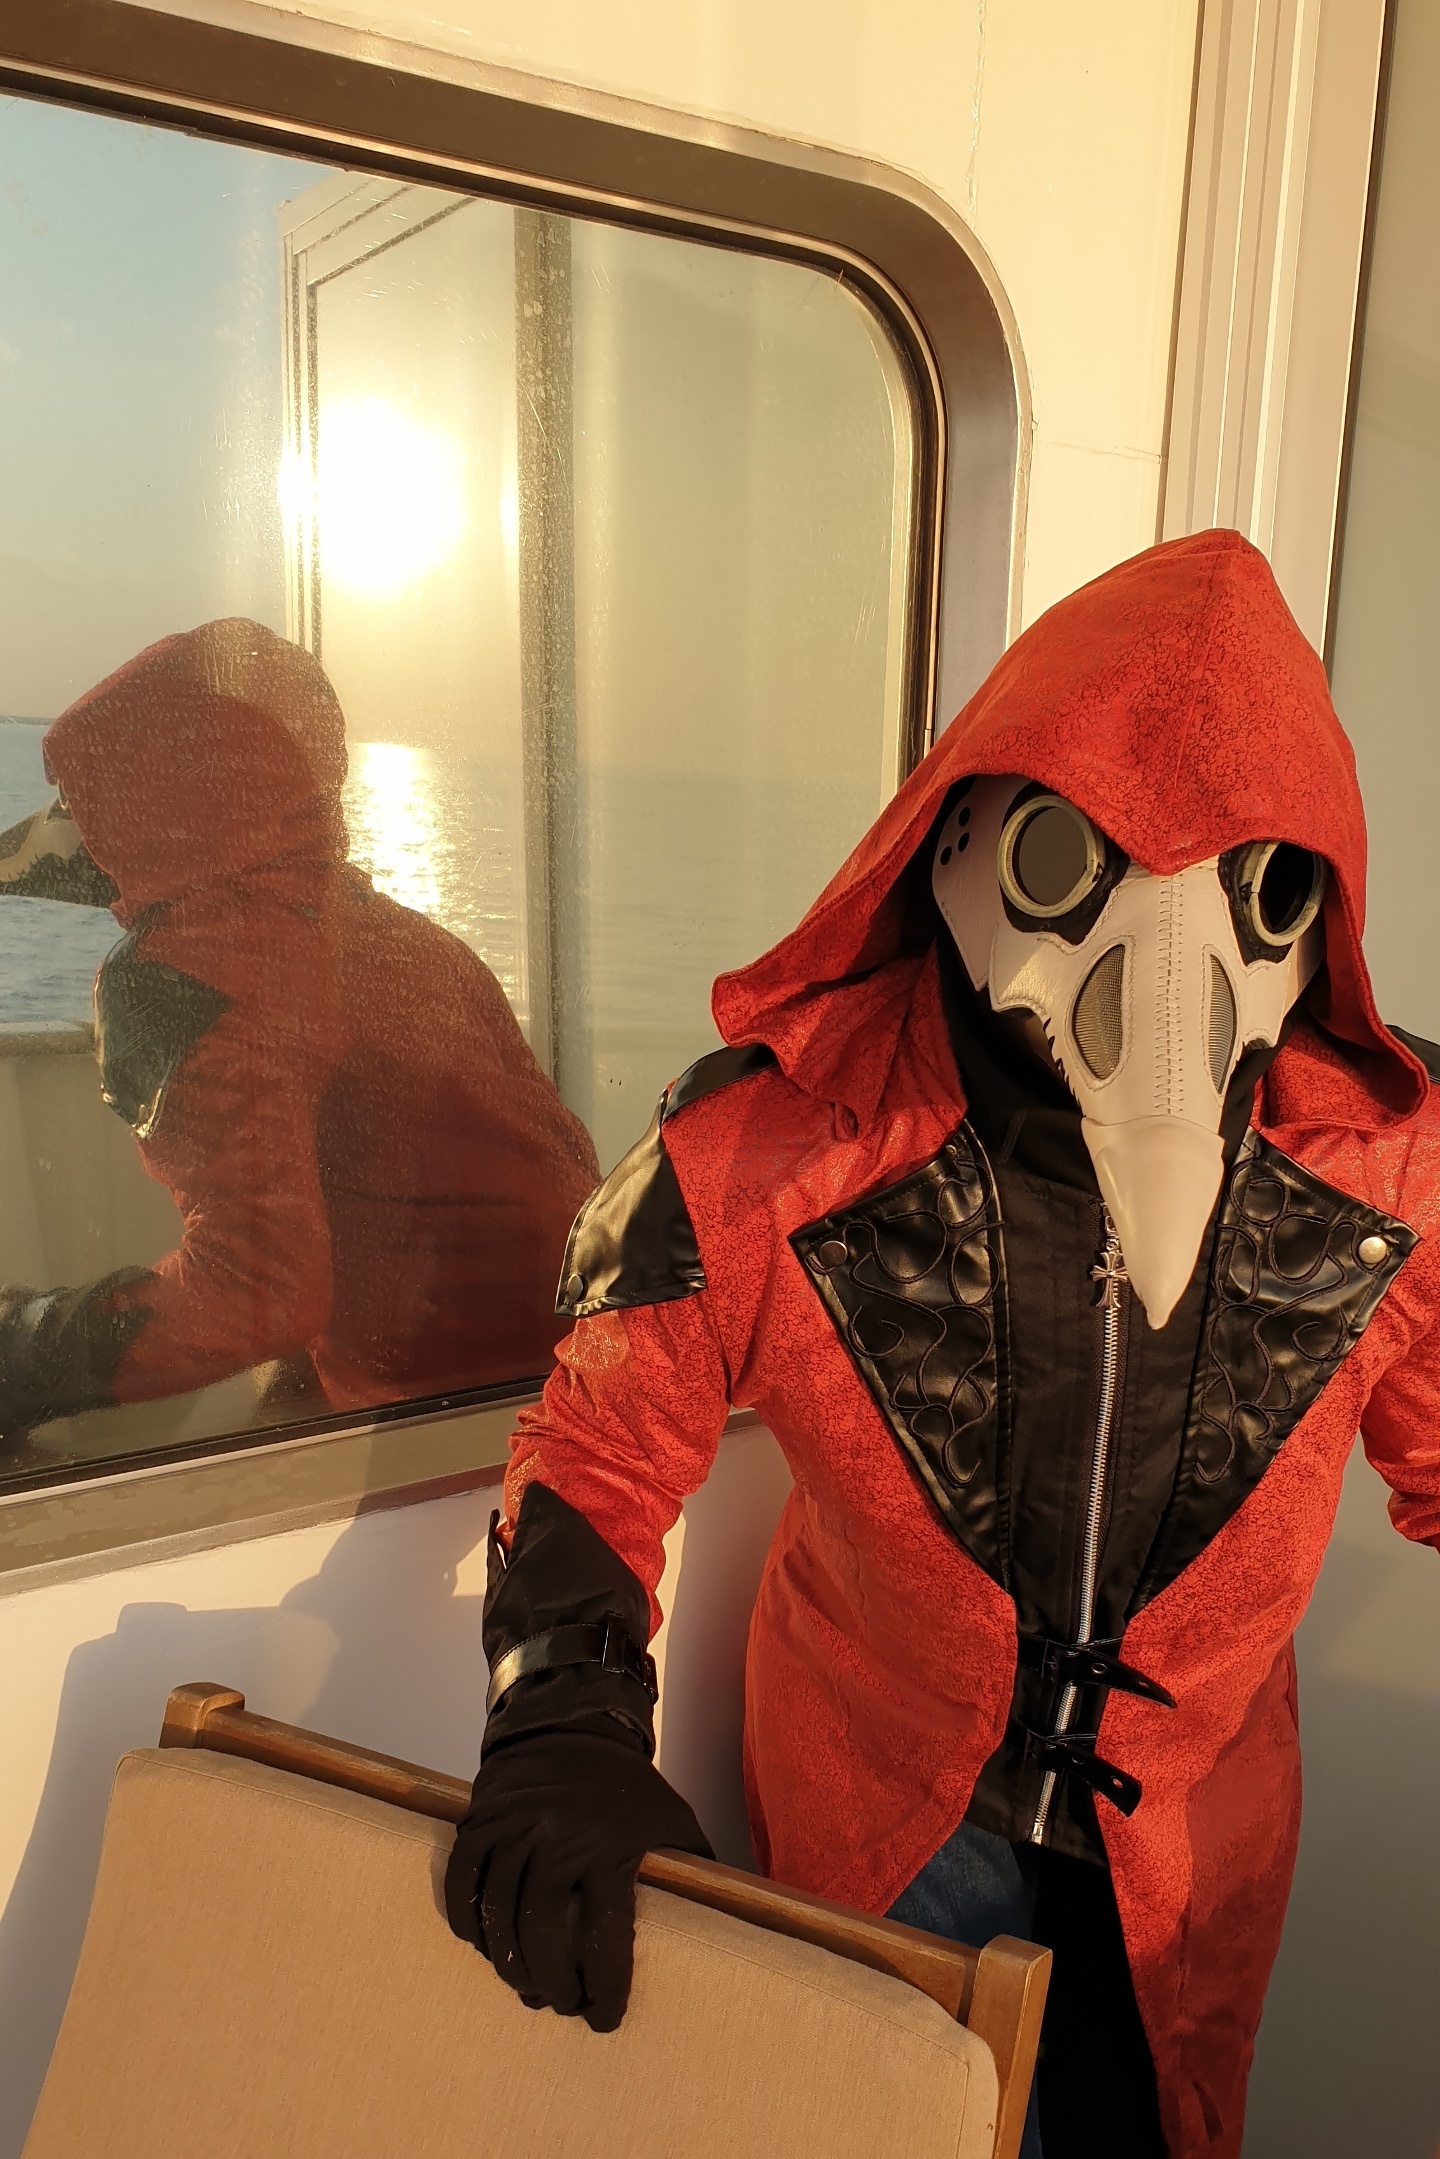 Plague Dr. Apacius rests on a motor ship - My, Mask, The photo, Cosplay, Professional shooting, Costume, Models, PHOTOSESSION, Plague, Plague Doctor, Cosplayers, Mobile photography, Motor ship, Russia, Travels, Travel across Russia, Lake, Rybinsk Reservoir, Ship, Longpost